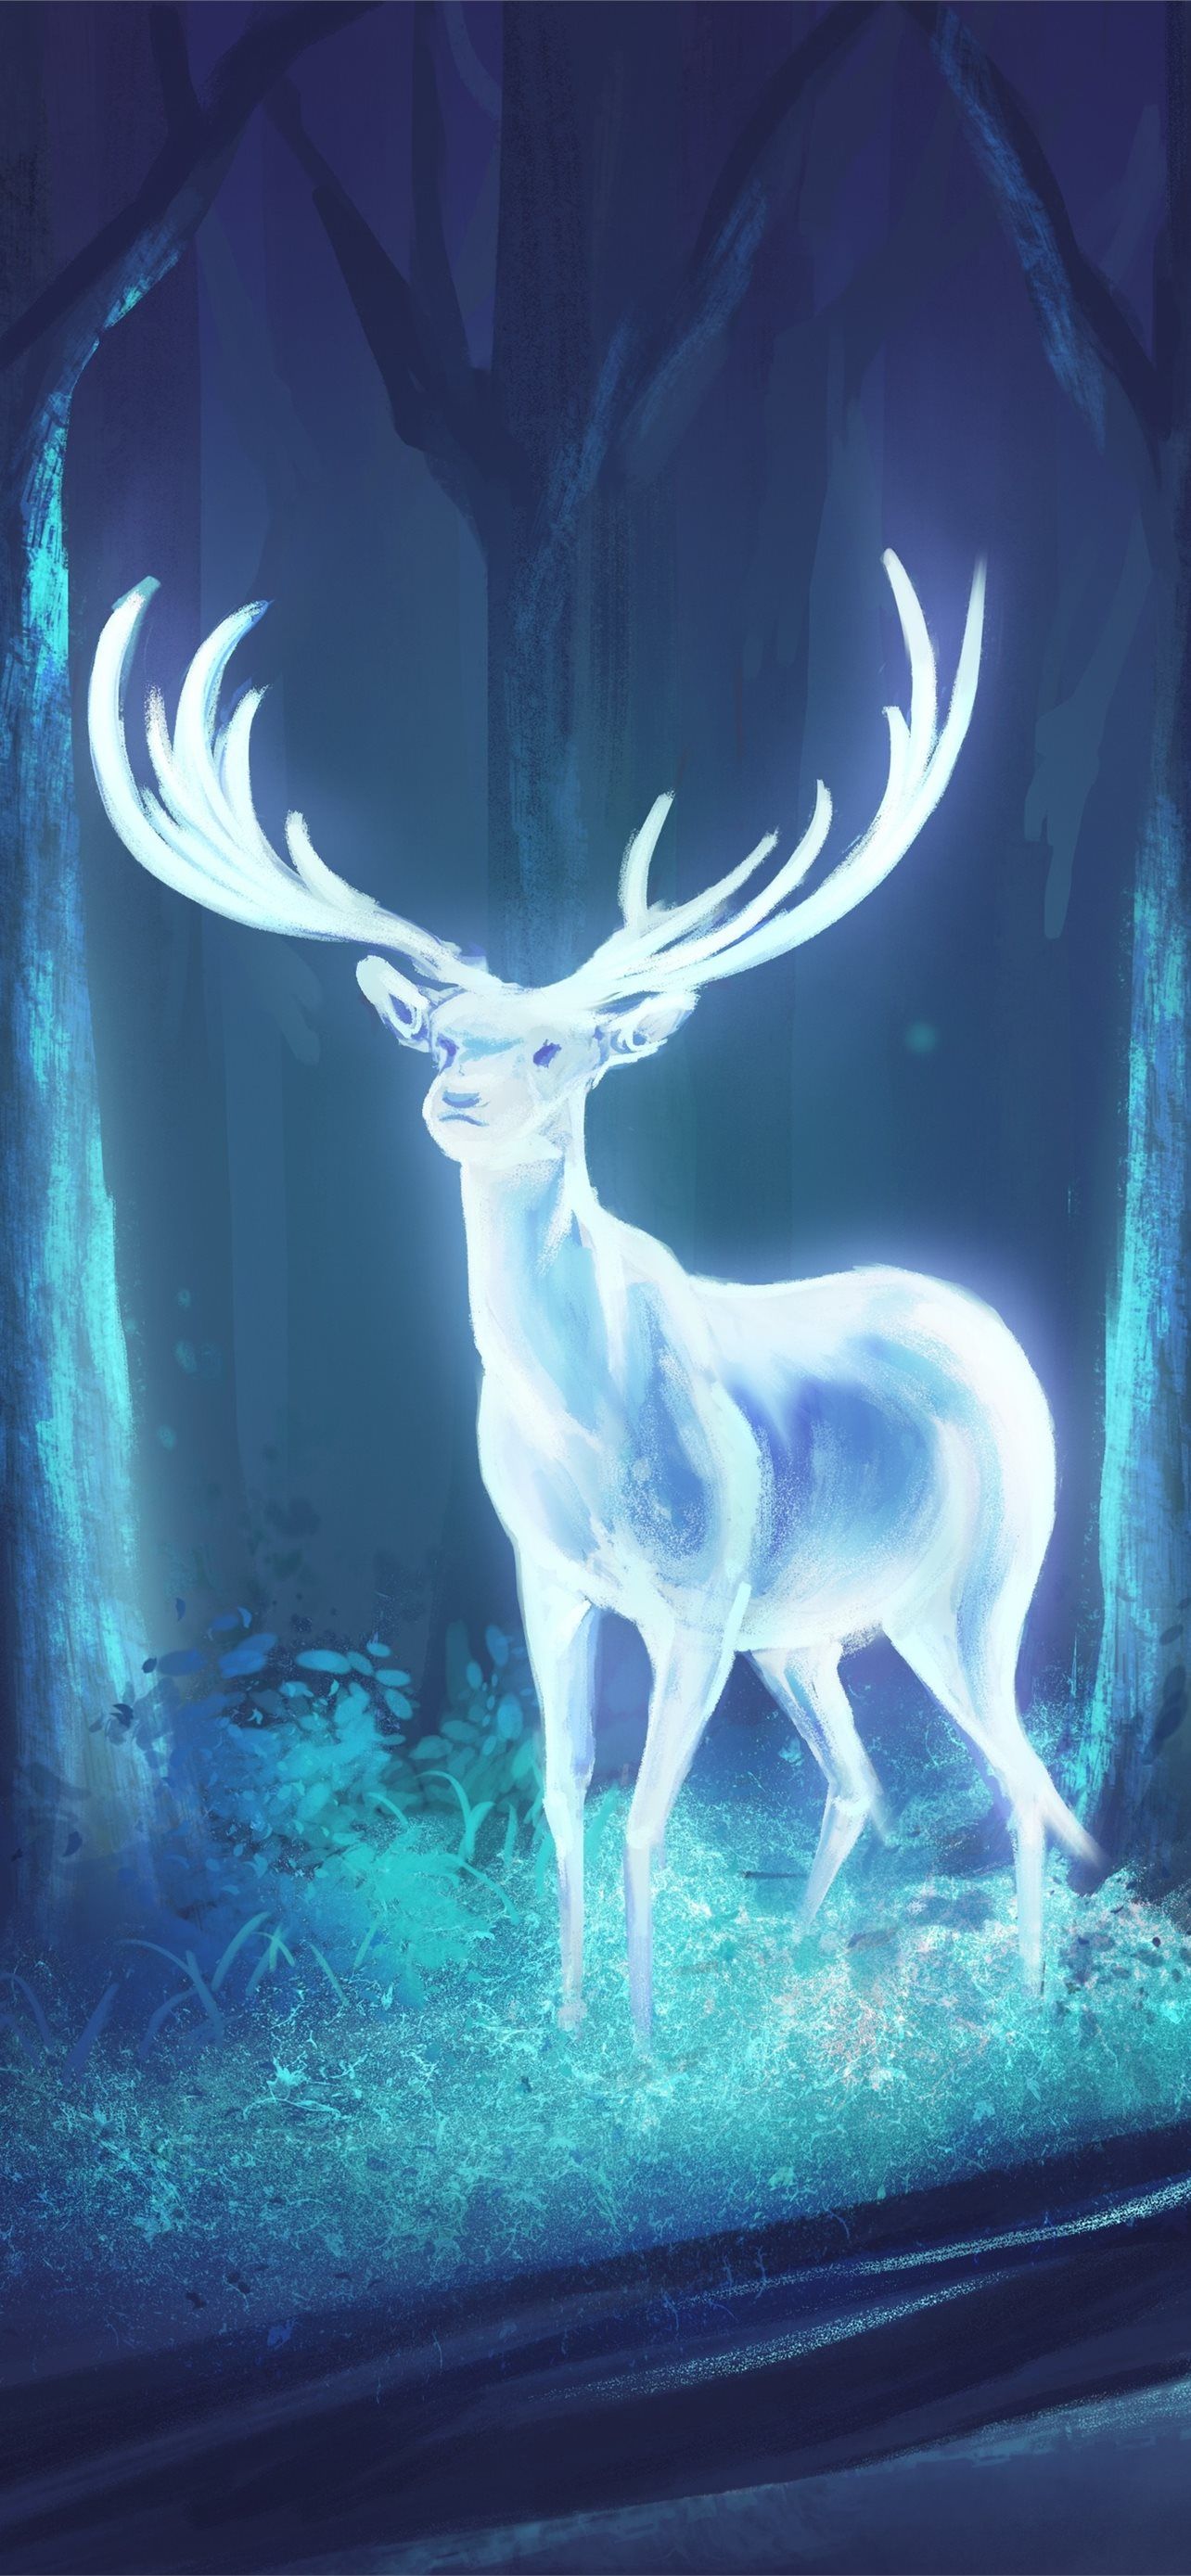 A white stag with antlers glowing blue in the forest - Deer